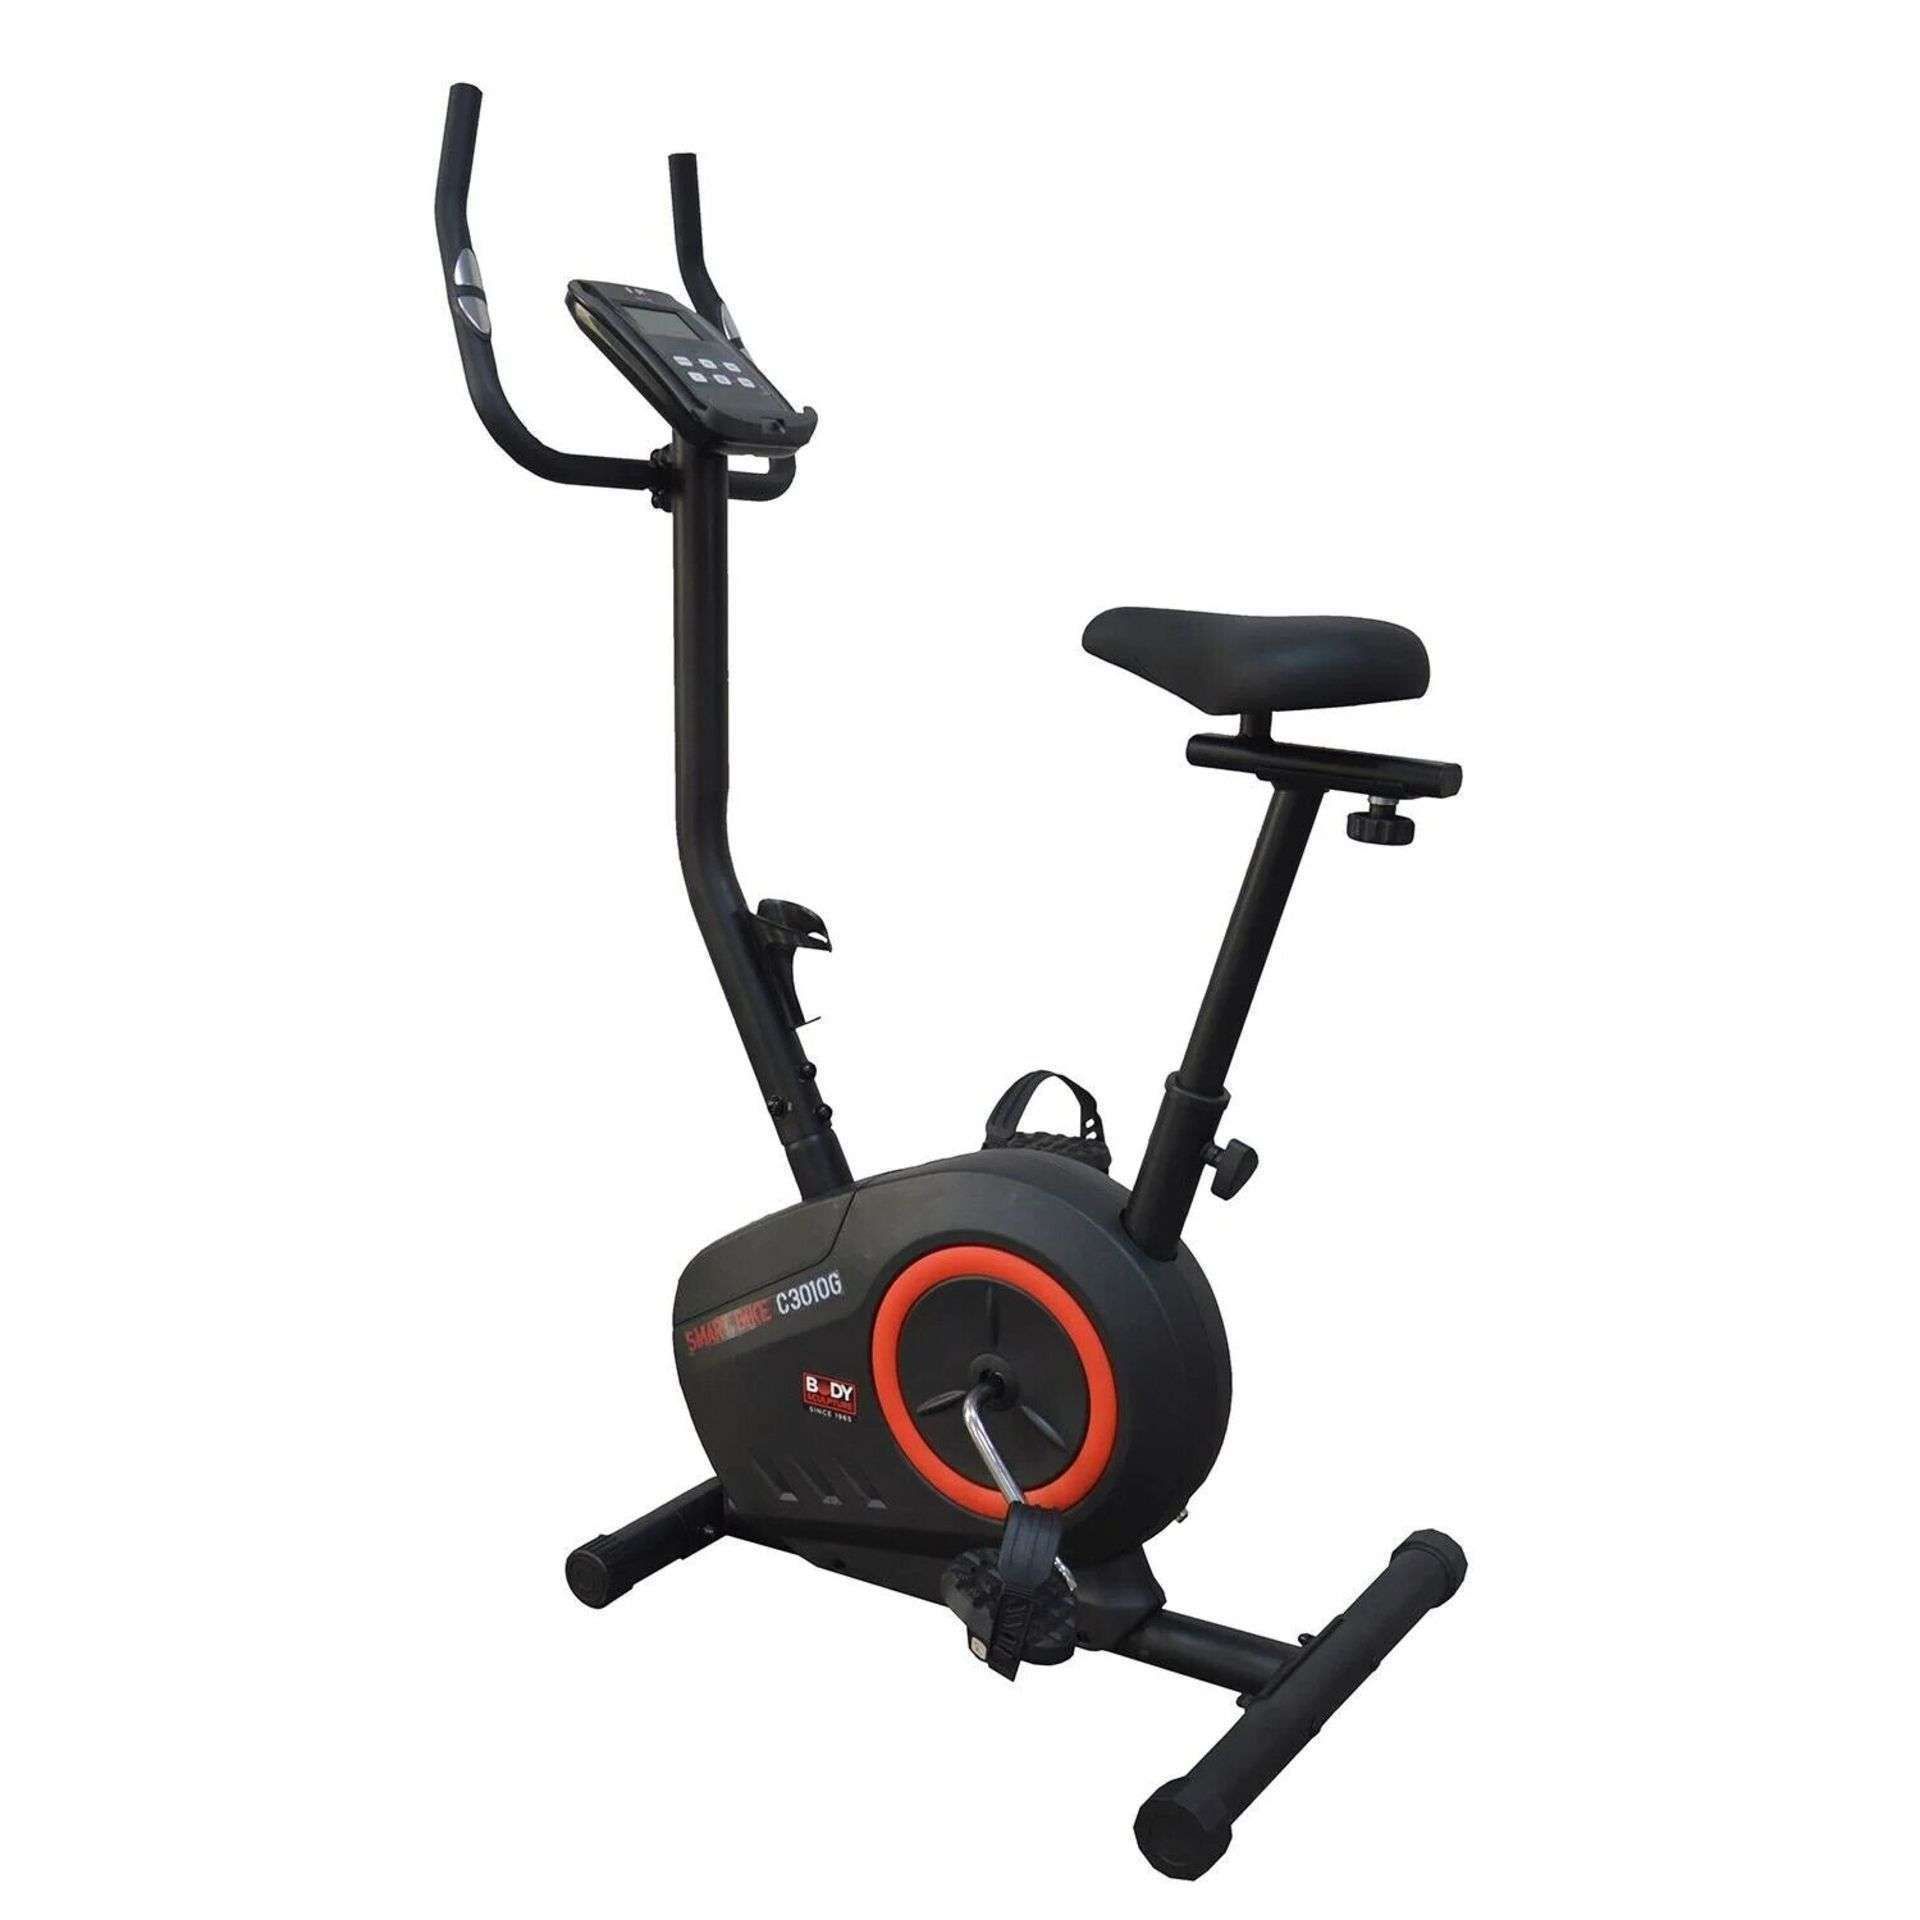 New & Boxed Body Sculpture Magnetic programmable Exercise Bike. RRP £360. Body Sculpture